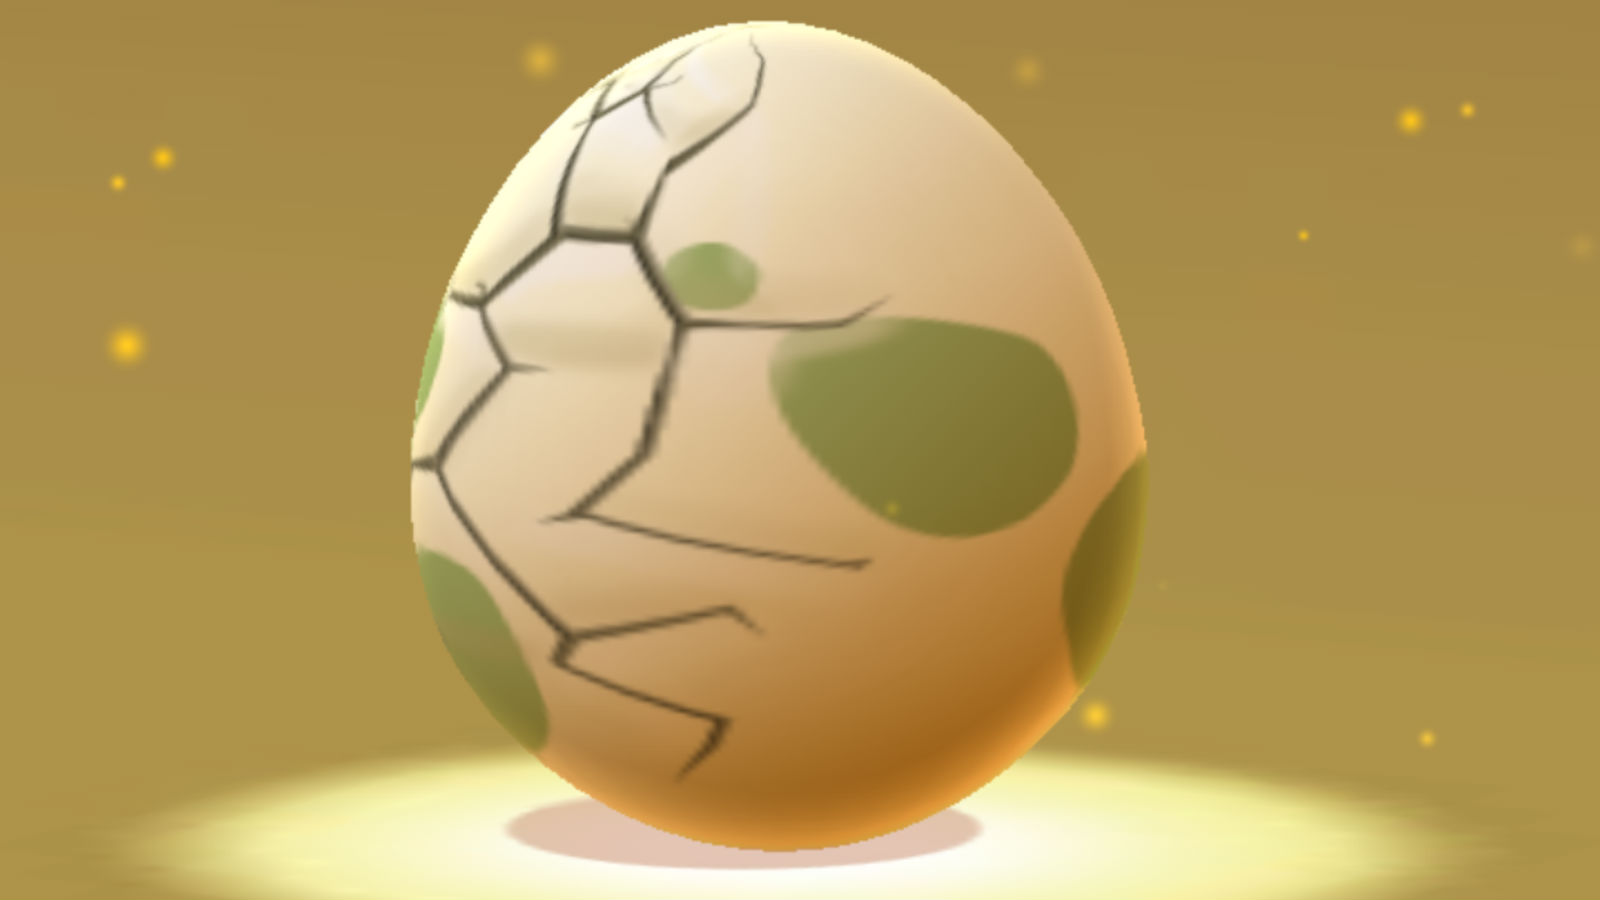 Pokemon Go Continues Its Drip Fed Update Pace With Egg Balancing